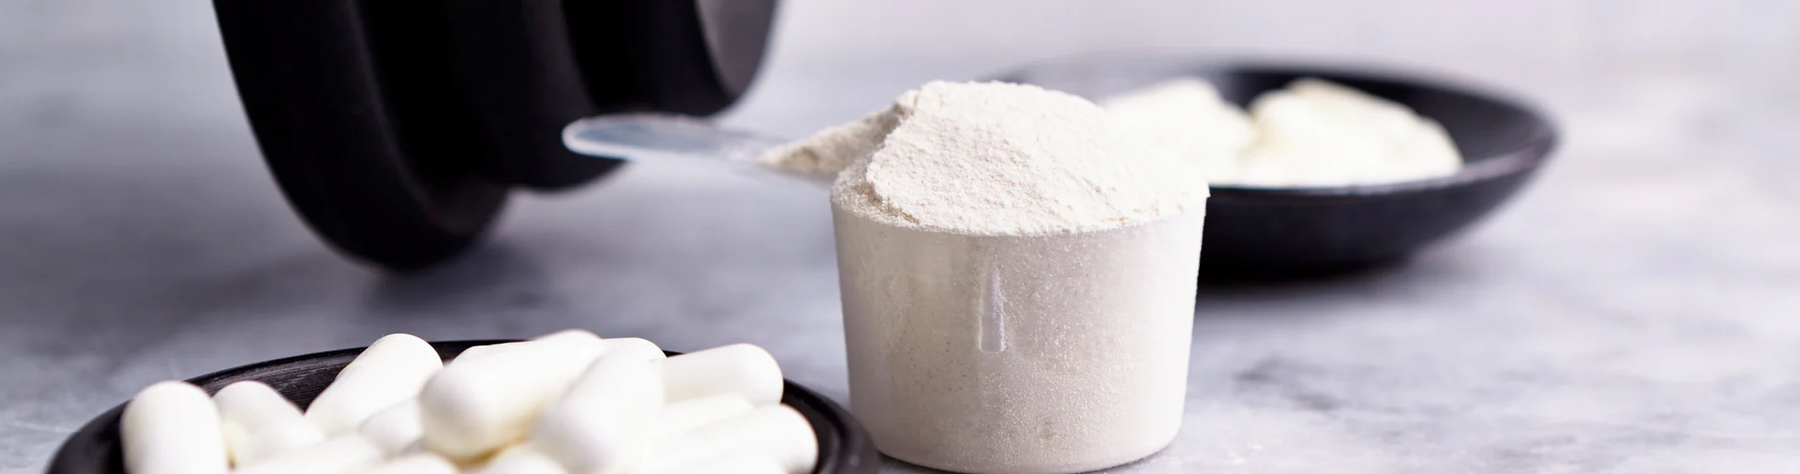 All You Need To Know About Creatine